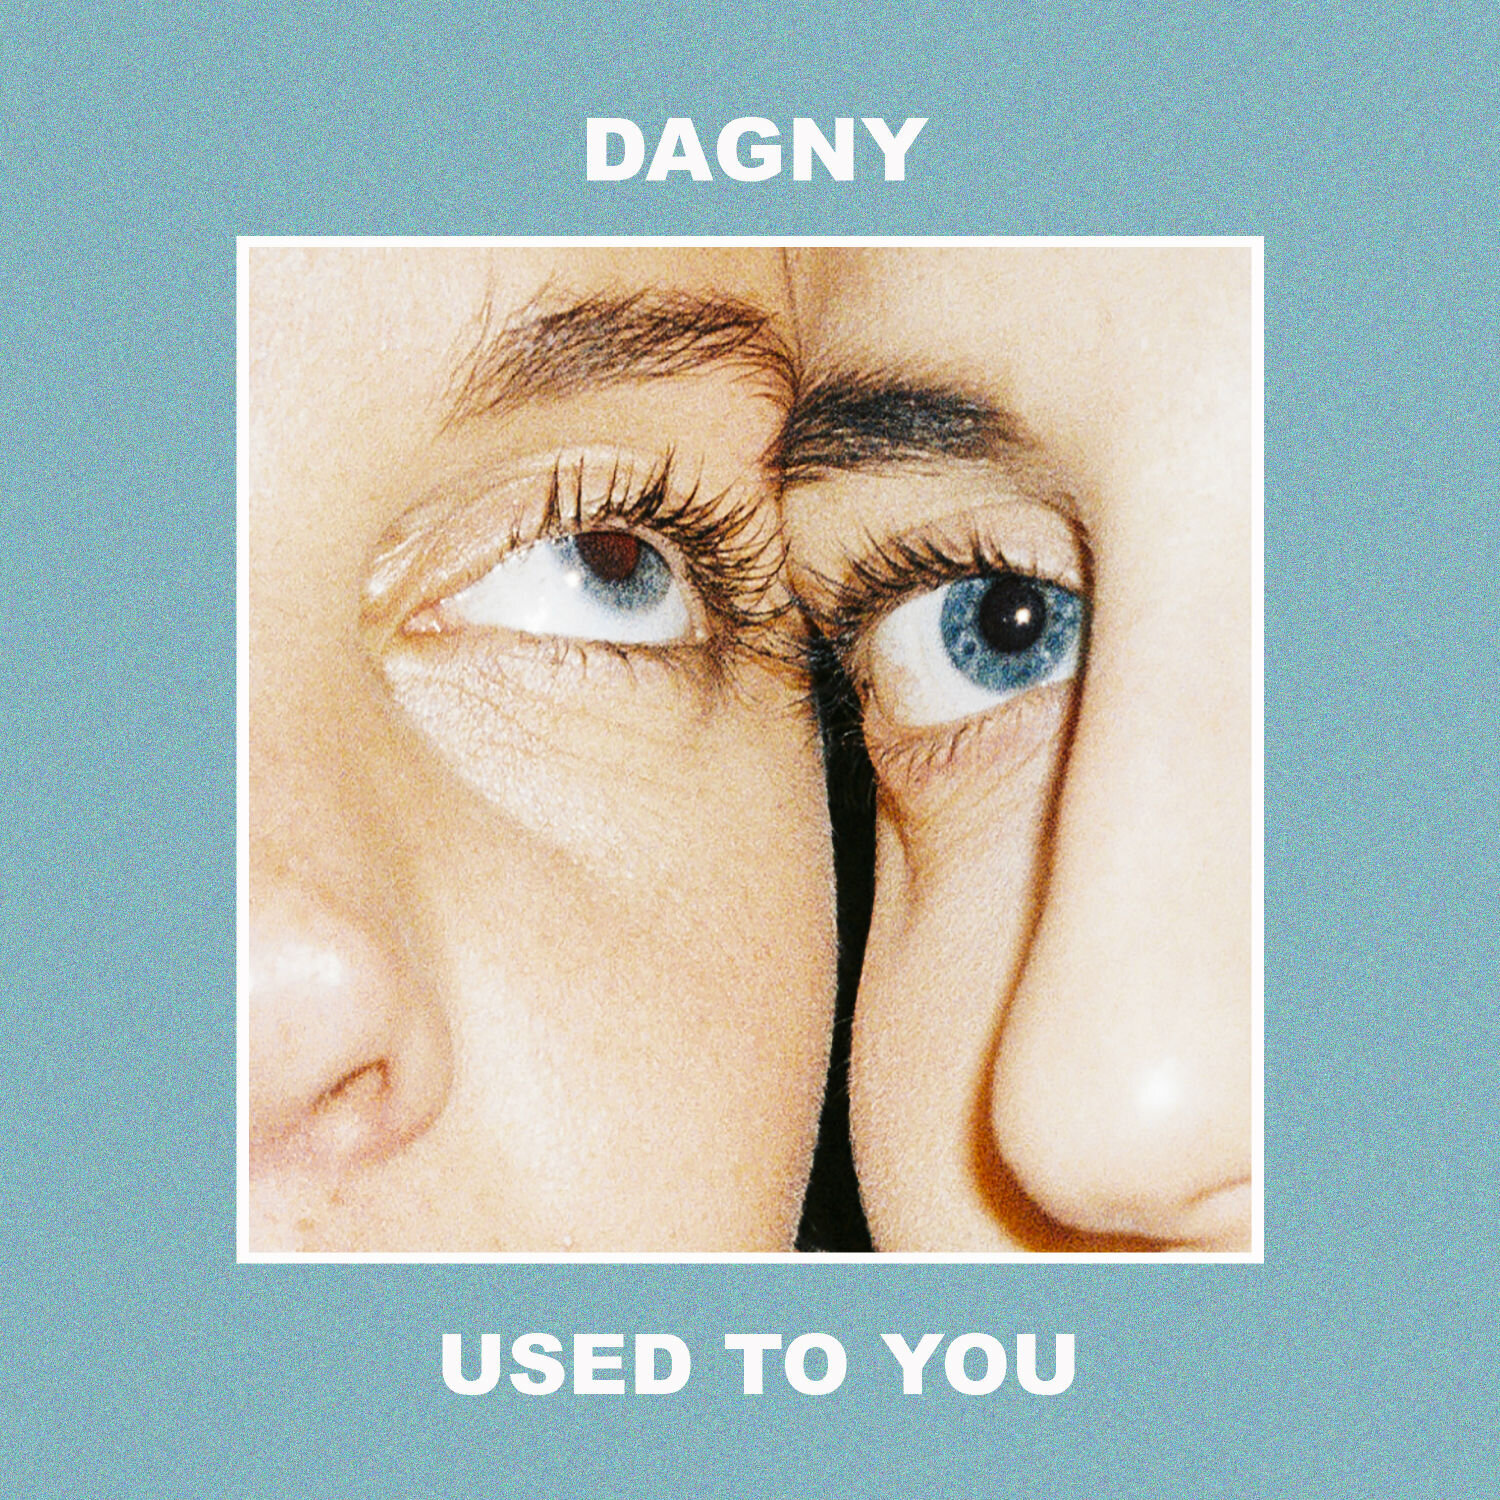 Dagny - Used to you